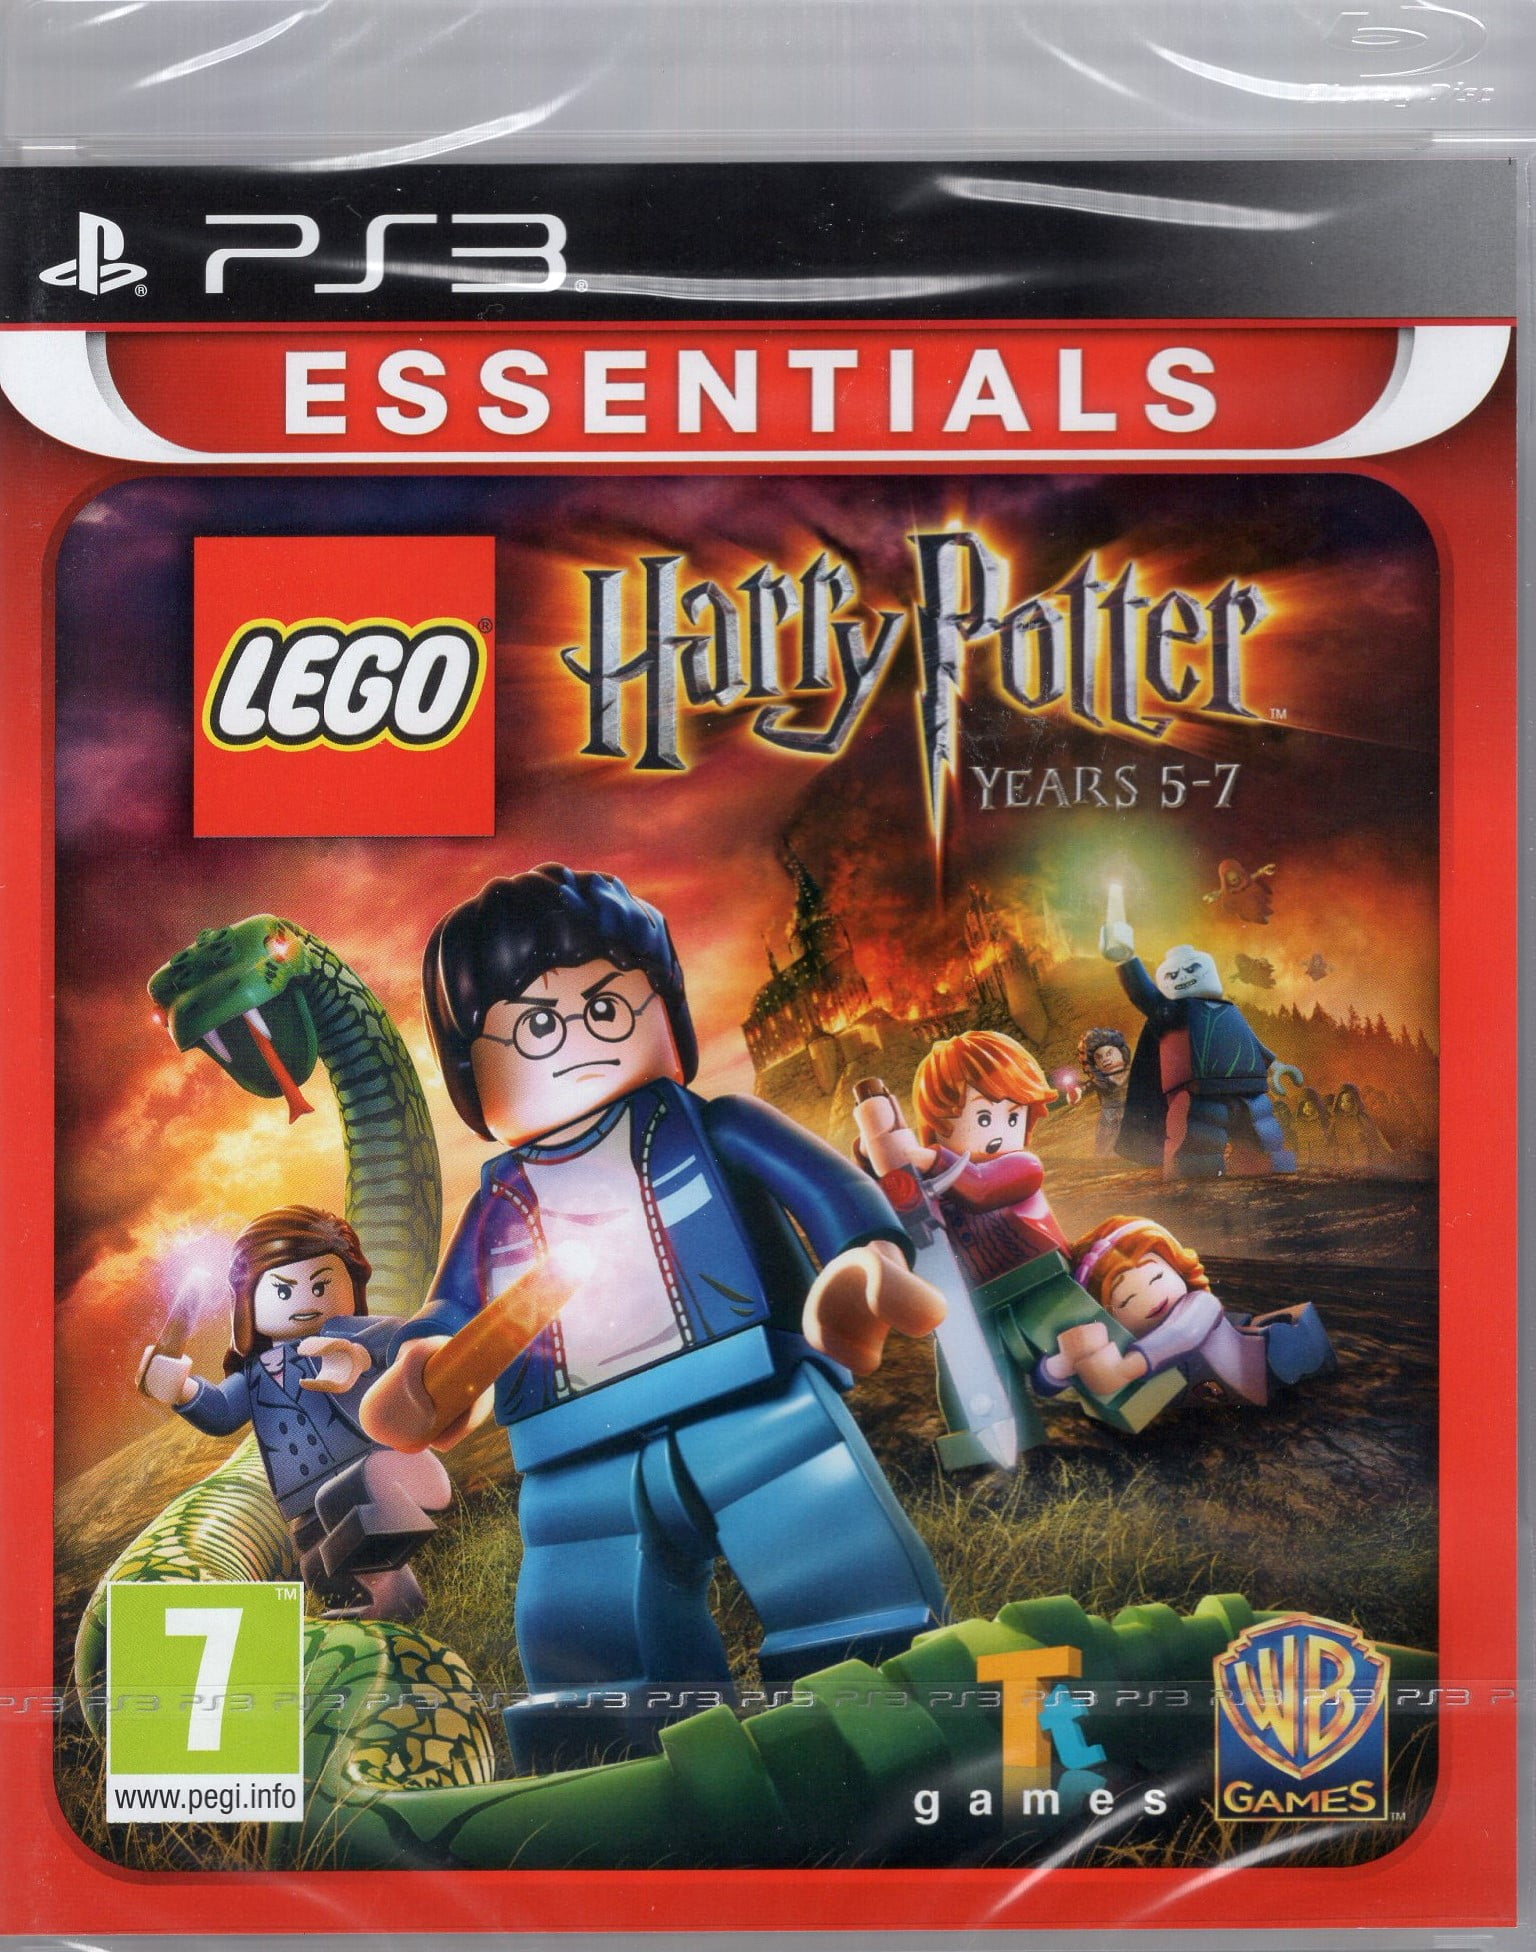 LEGO Harry Potter: Years 5-7 Box Shot for PlayStation 3 - GameFAQs